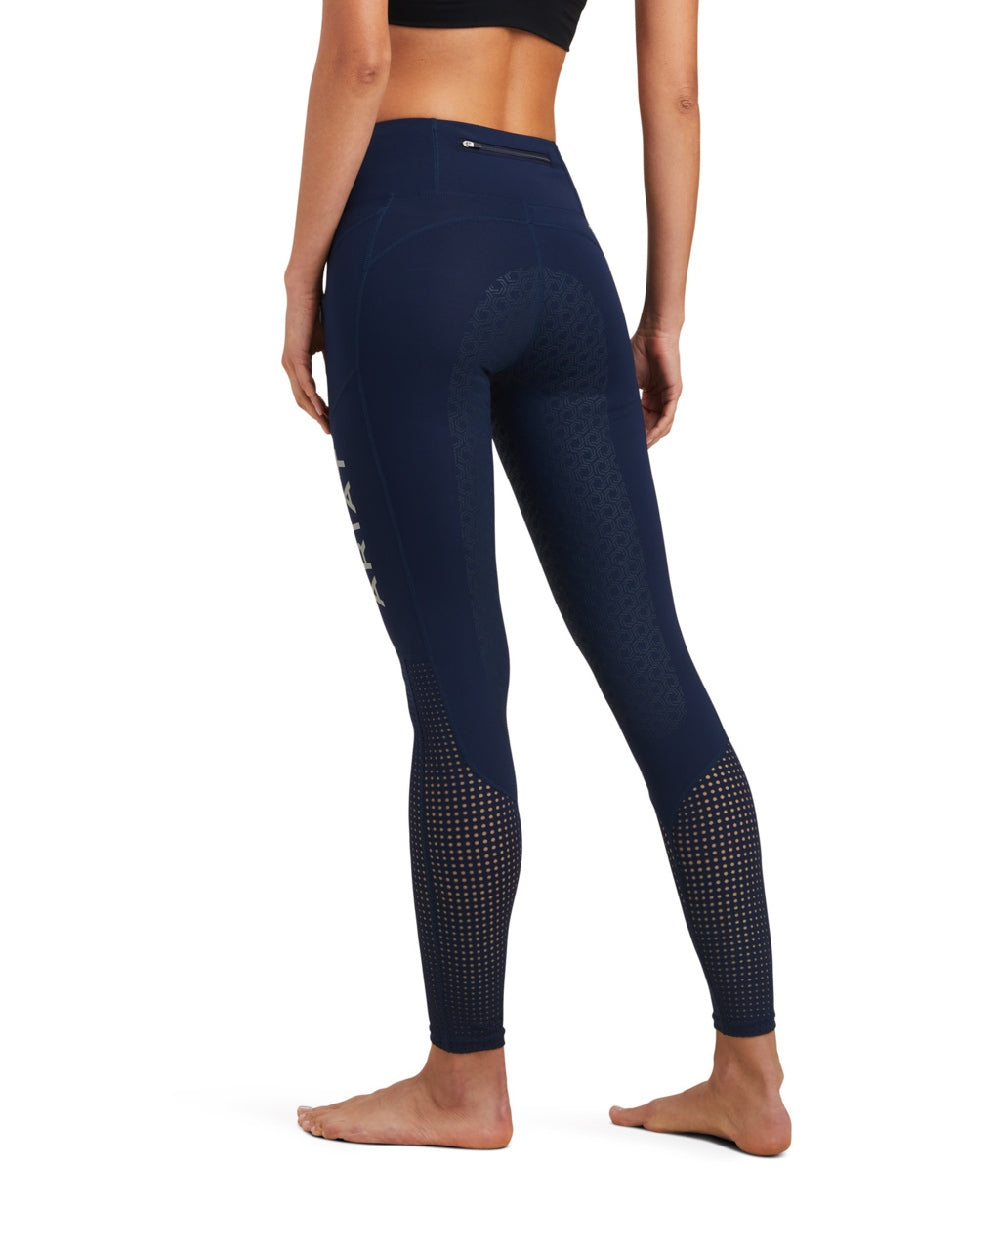 Ariat Womens Eos Full Seat Tights in Navy 